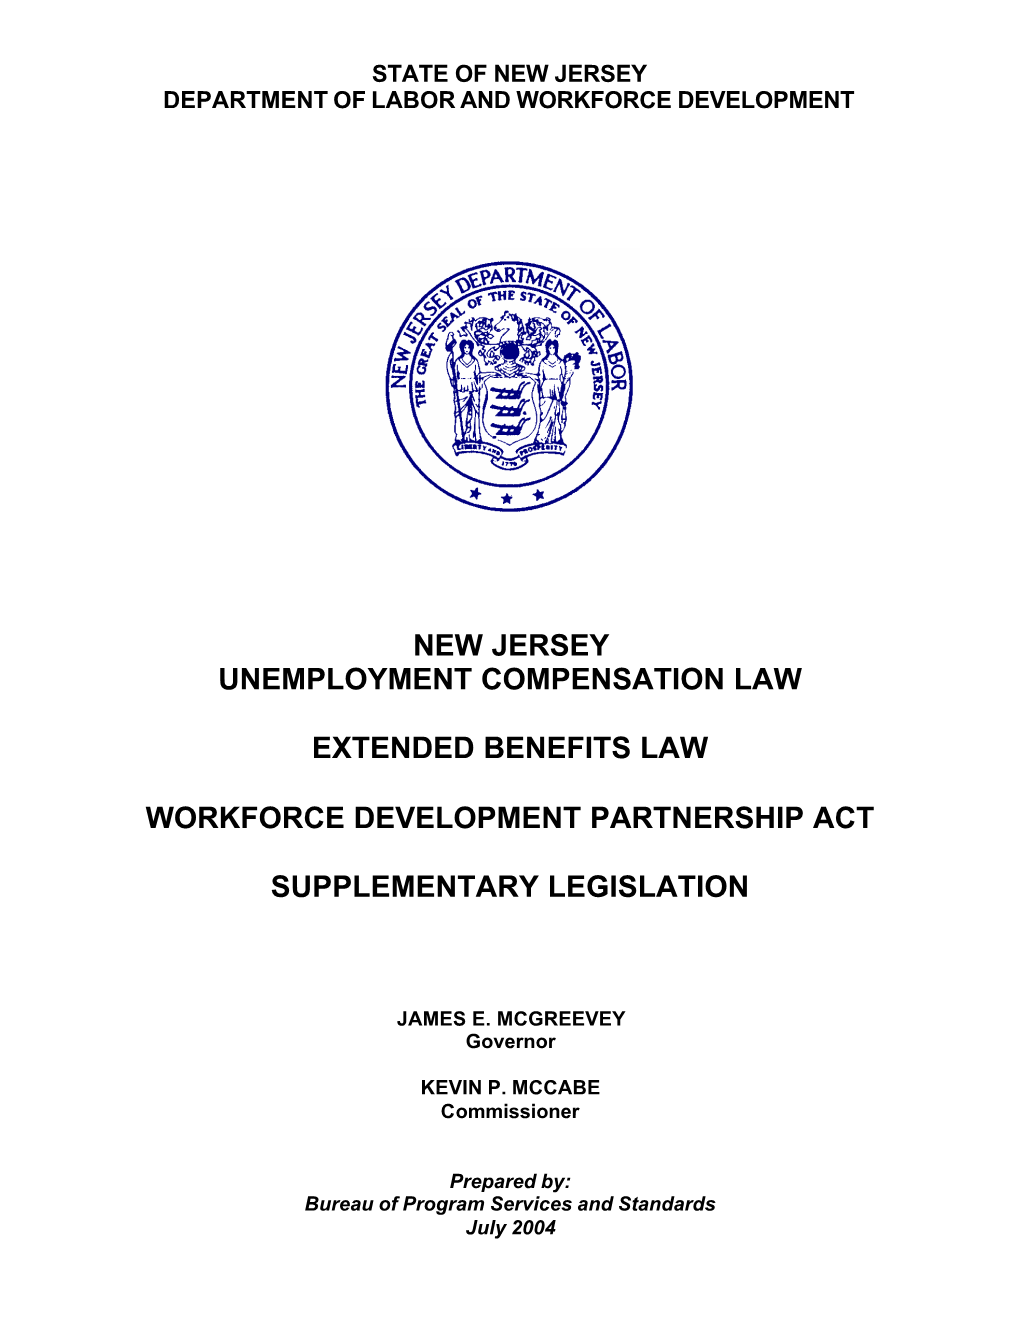 New Jersey Unemployment Compensation Law Extended Benefits